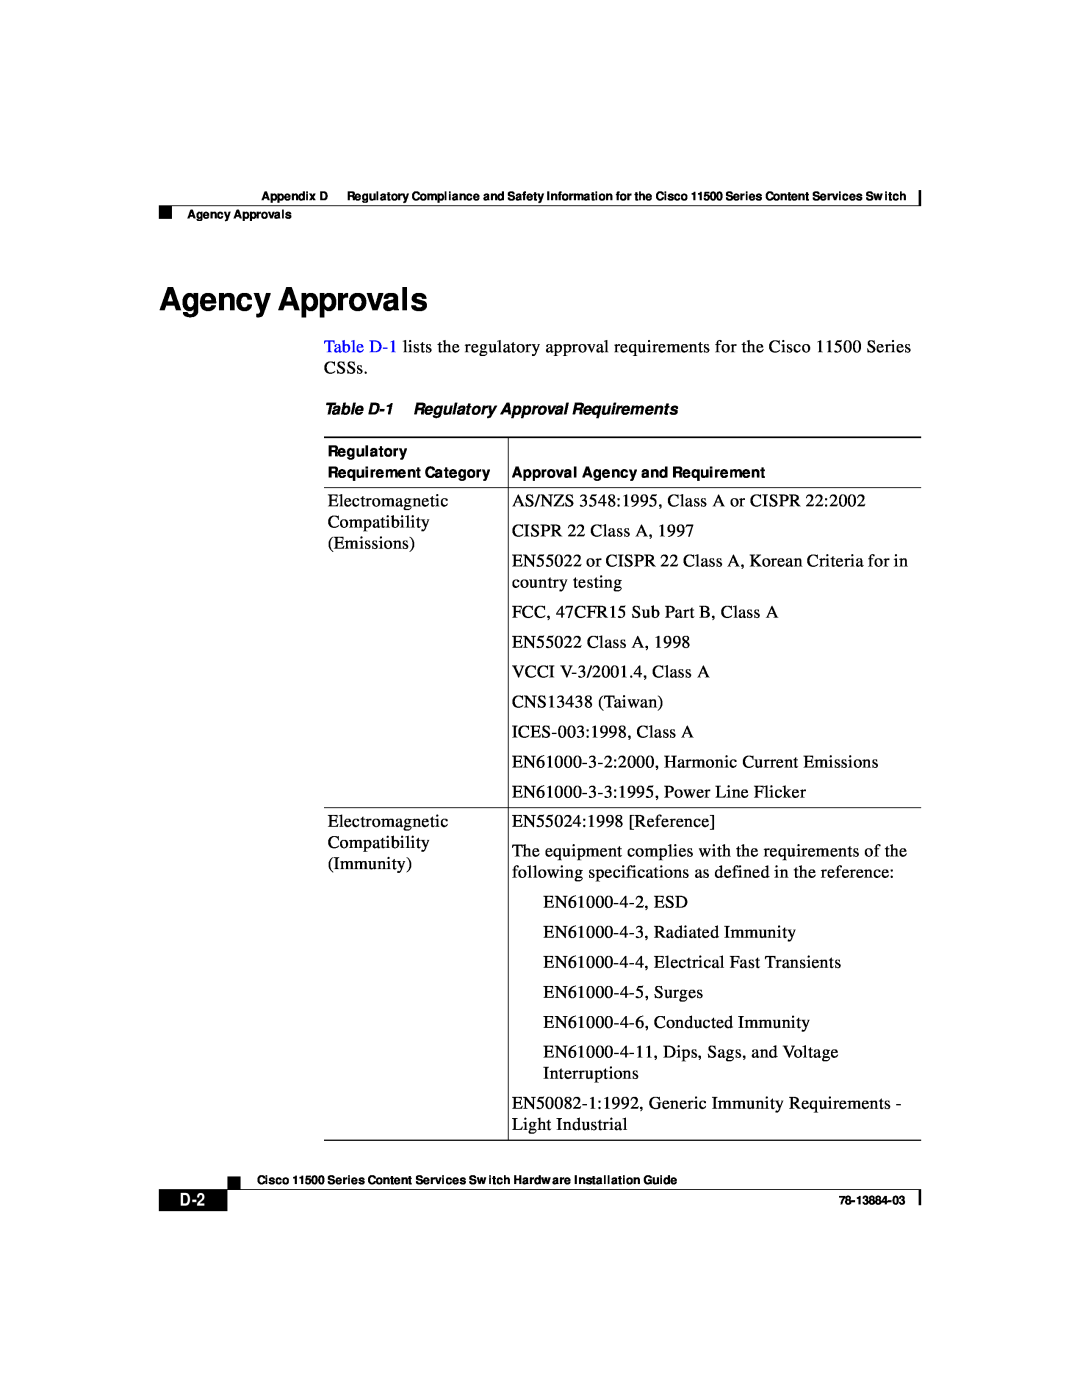 Cisco Systems 11500 Series manual Agency Approvals 